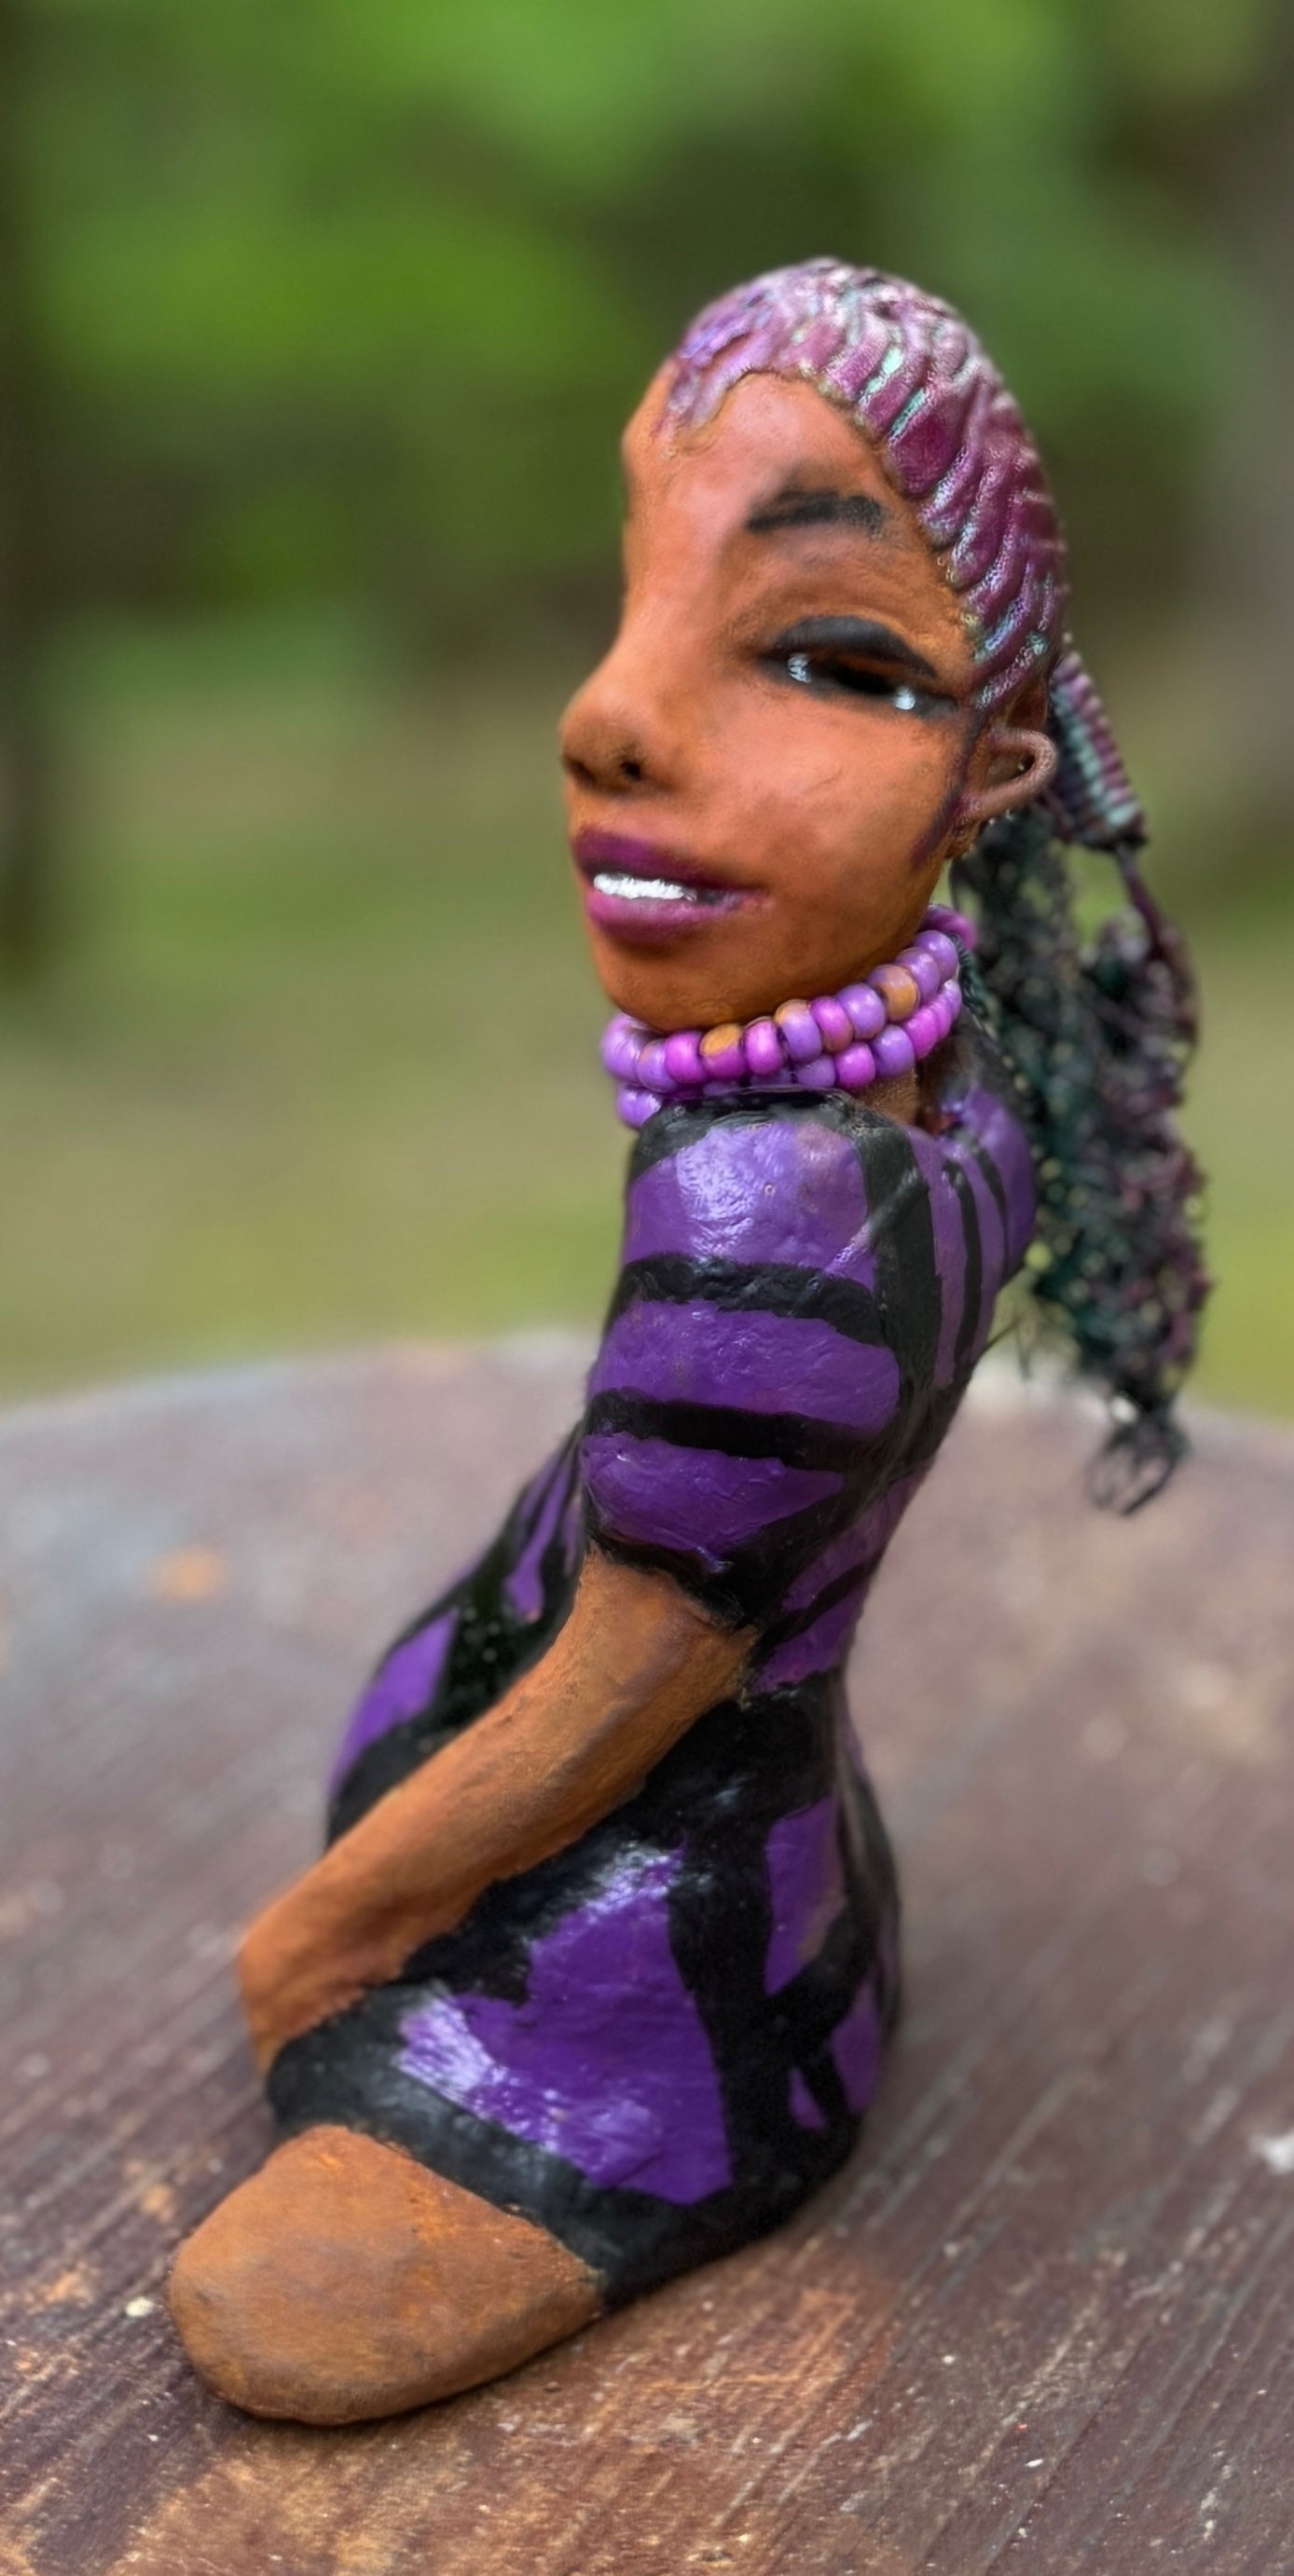 Zola is 7" x 5" x 3" raku fired scupture and weighs 12 ozs.<br>She wears a lustrous striped purple dress.<br>Her coiled wire hair is her crown of glory.<br><br>Zola sits in a yoga pose. Her expression is &nbsp;of curiosity. She will make an ideal beginning piece from the Herdew Collection!<br>Free Shipping